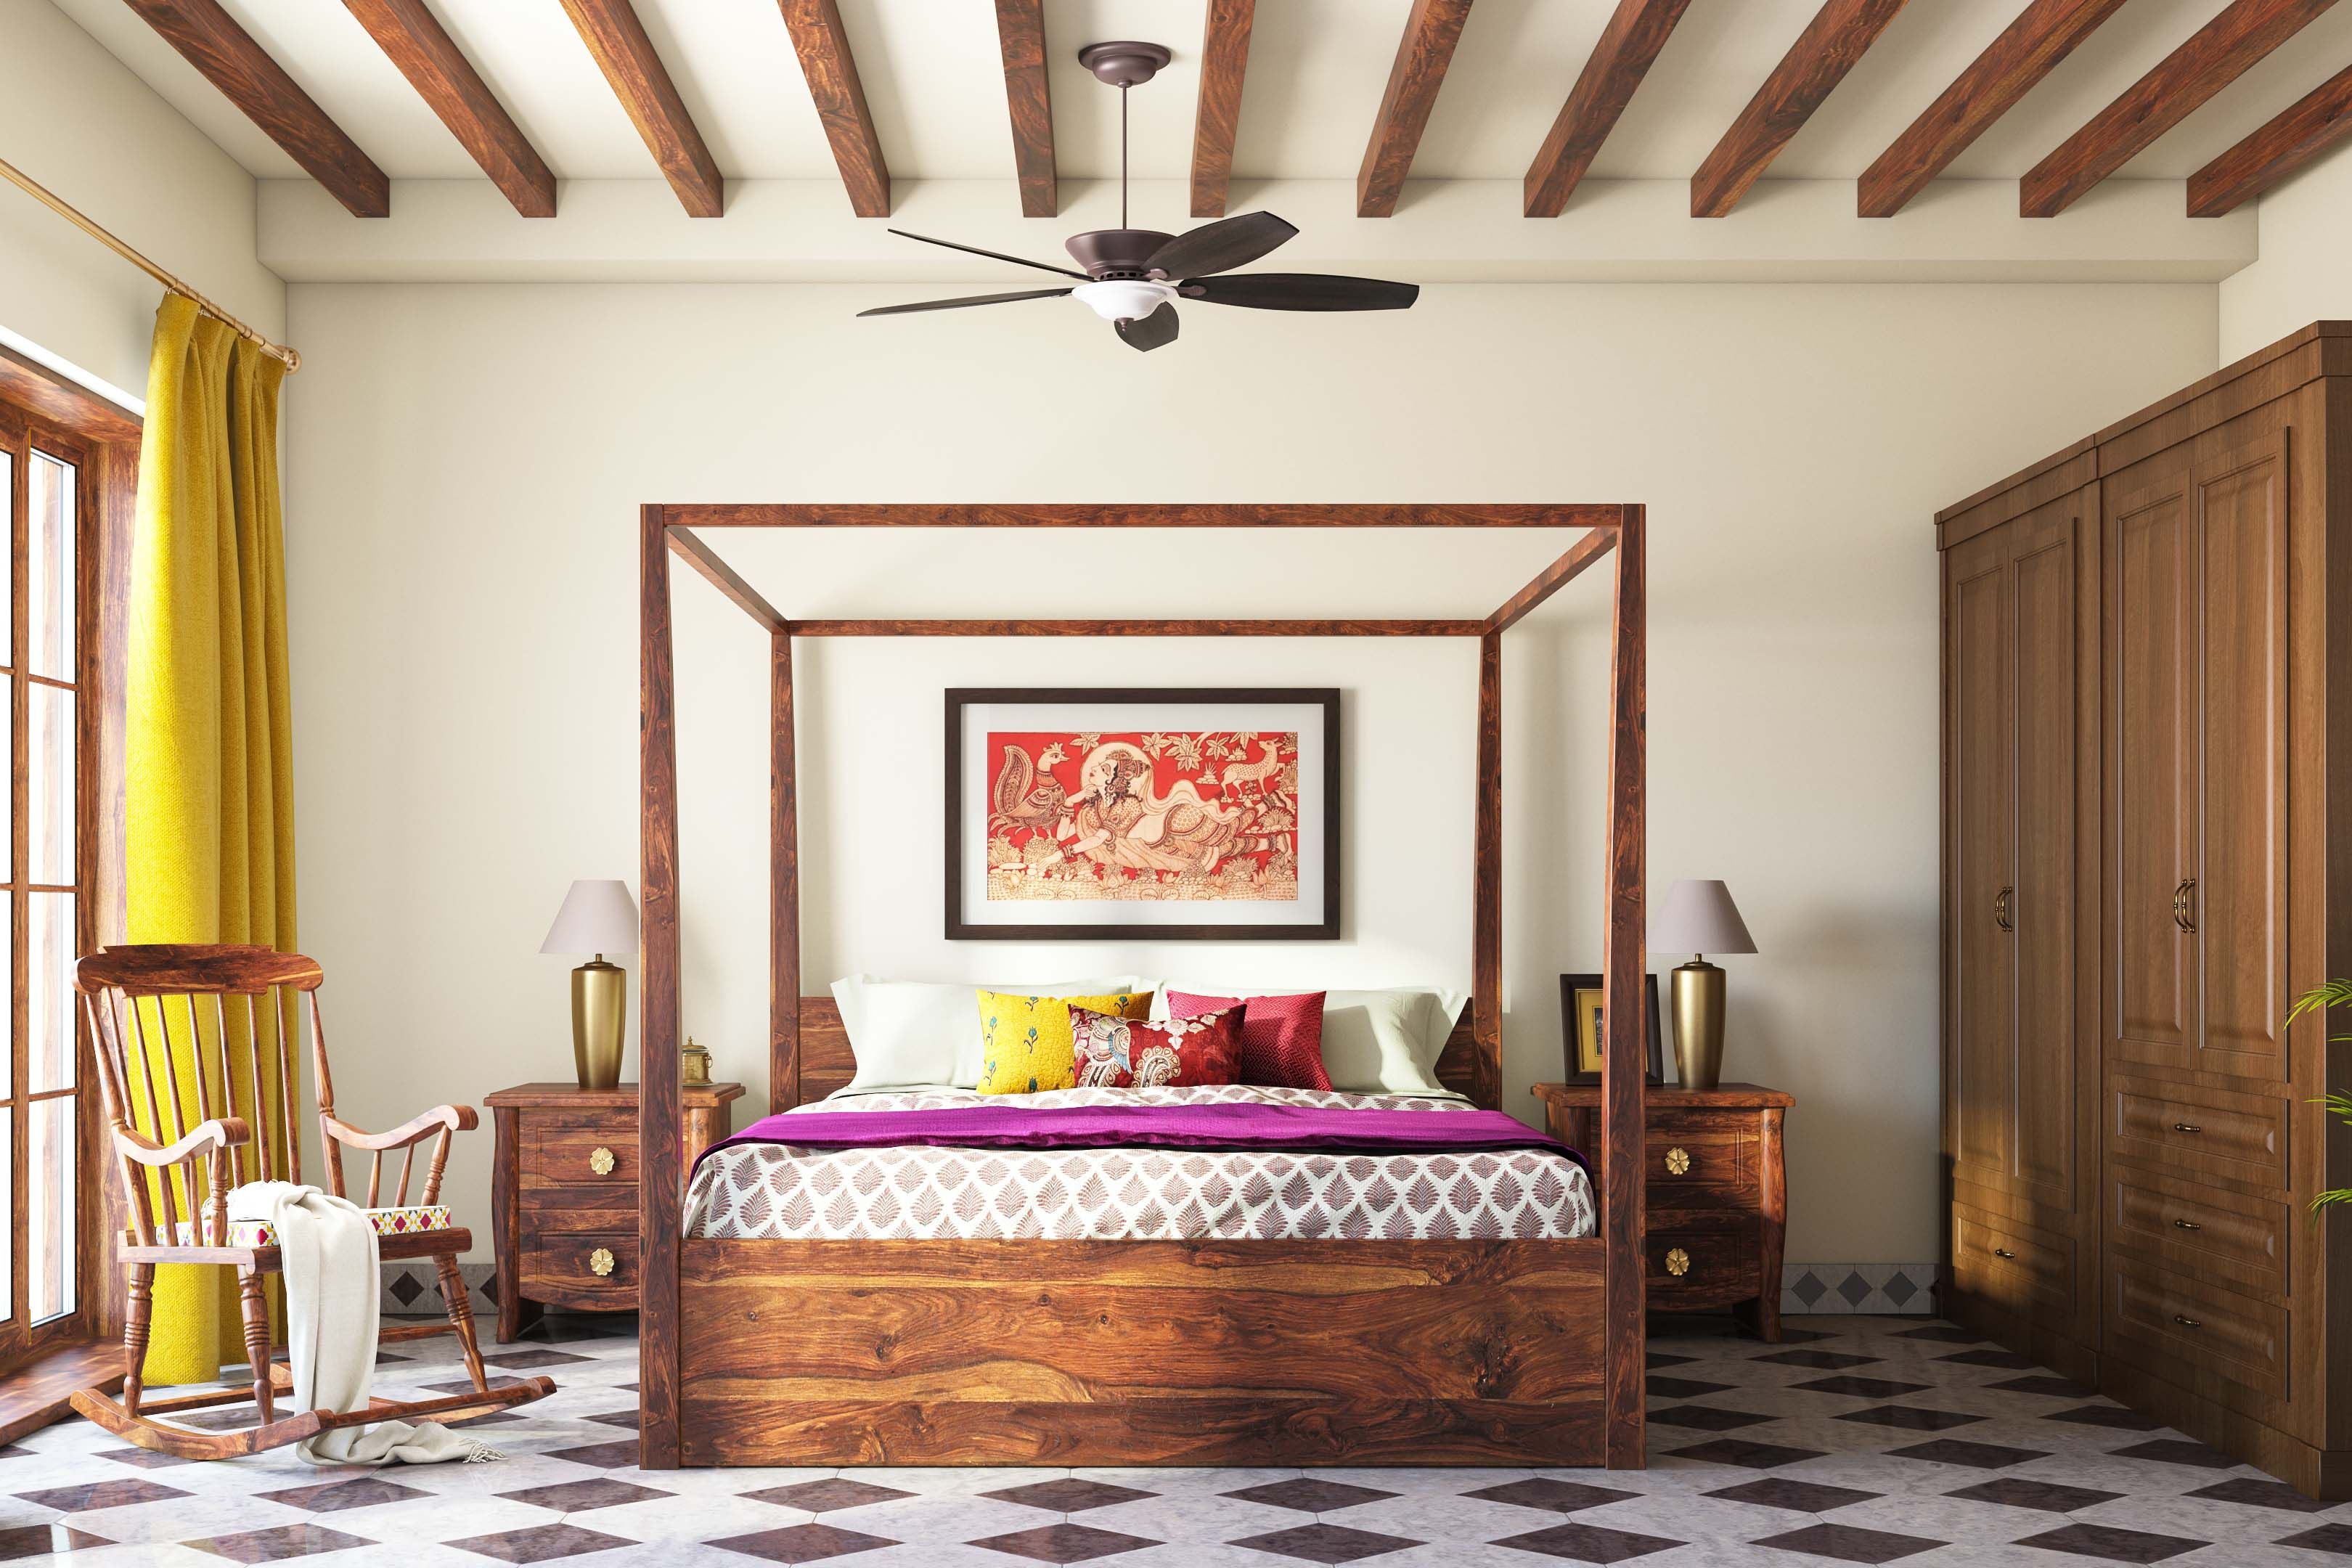 Transitional Bedroom Ceiling Design With 3D Wooden Beams